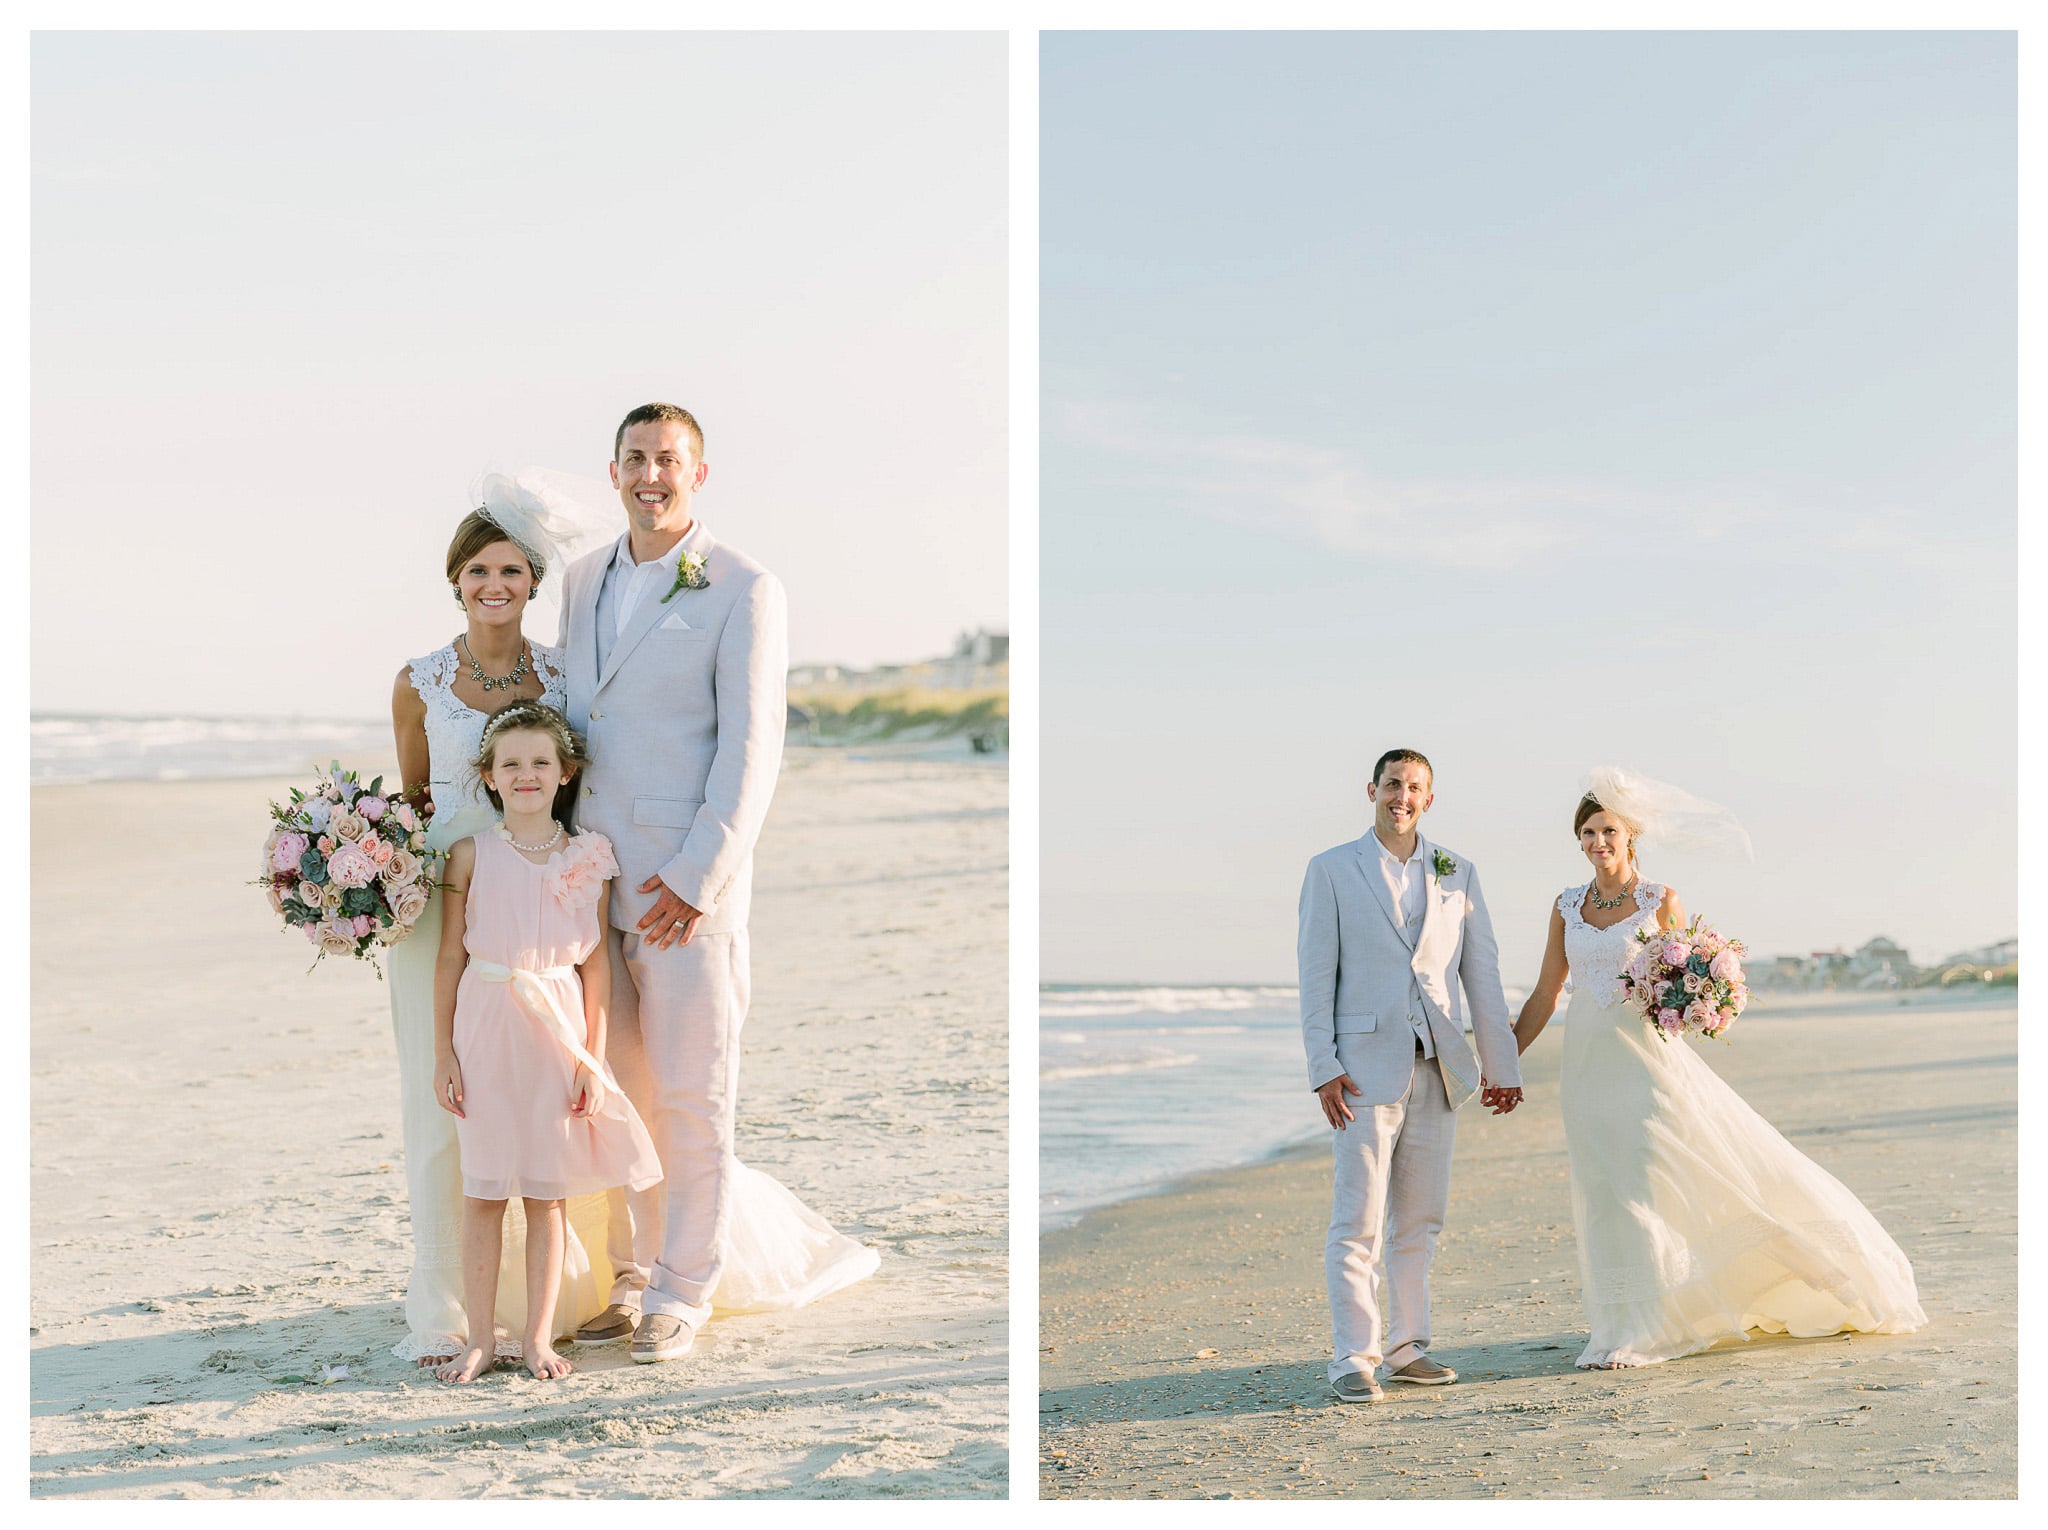 The Whole Family on the Sand - Father, Mother, and Daughter on the Sand of Myrtle beach - Venue - Beach House Gulf Stream Breeze, Beach Realty Catering and Cake - Buttercream Cakes and Catering, LLC Flowers - Callas Florist Event Rentals - Event Works DJ - Scott Shaw